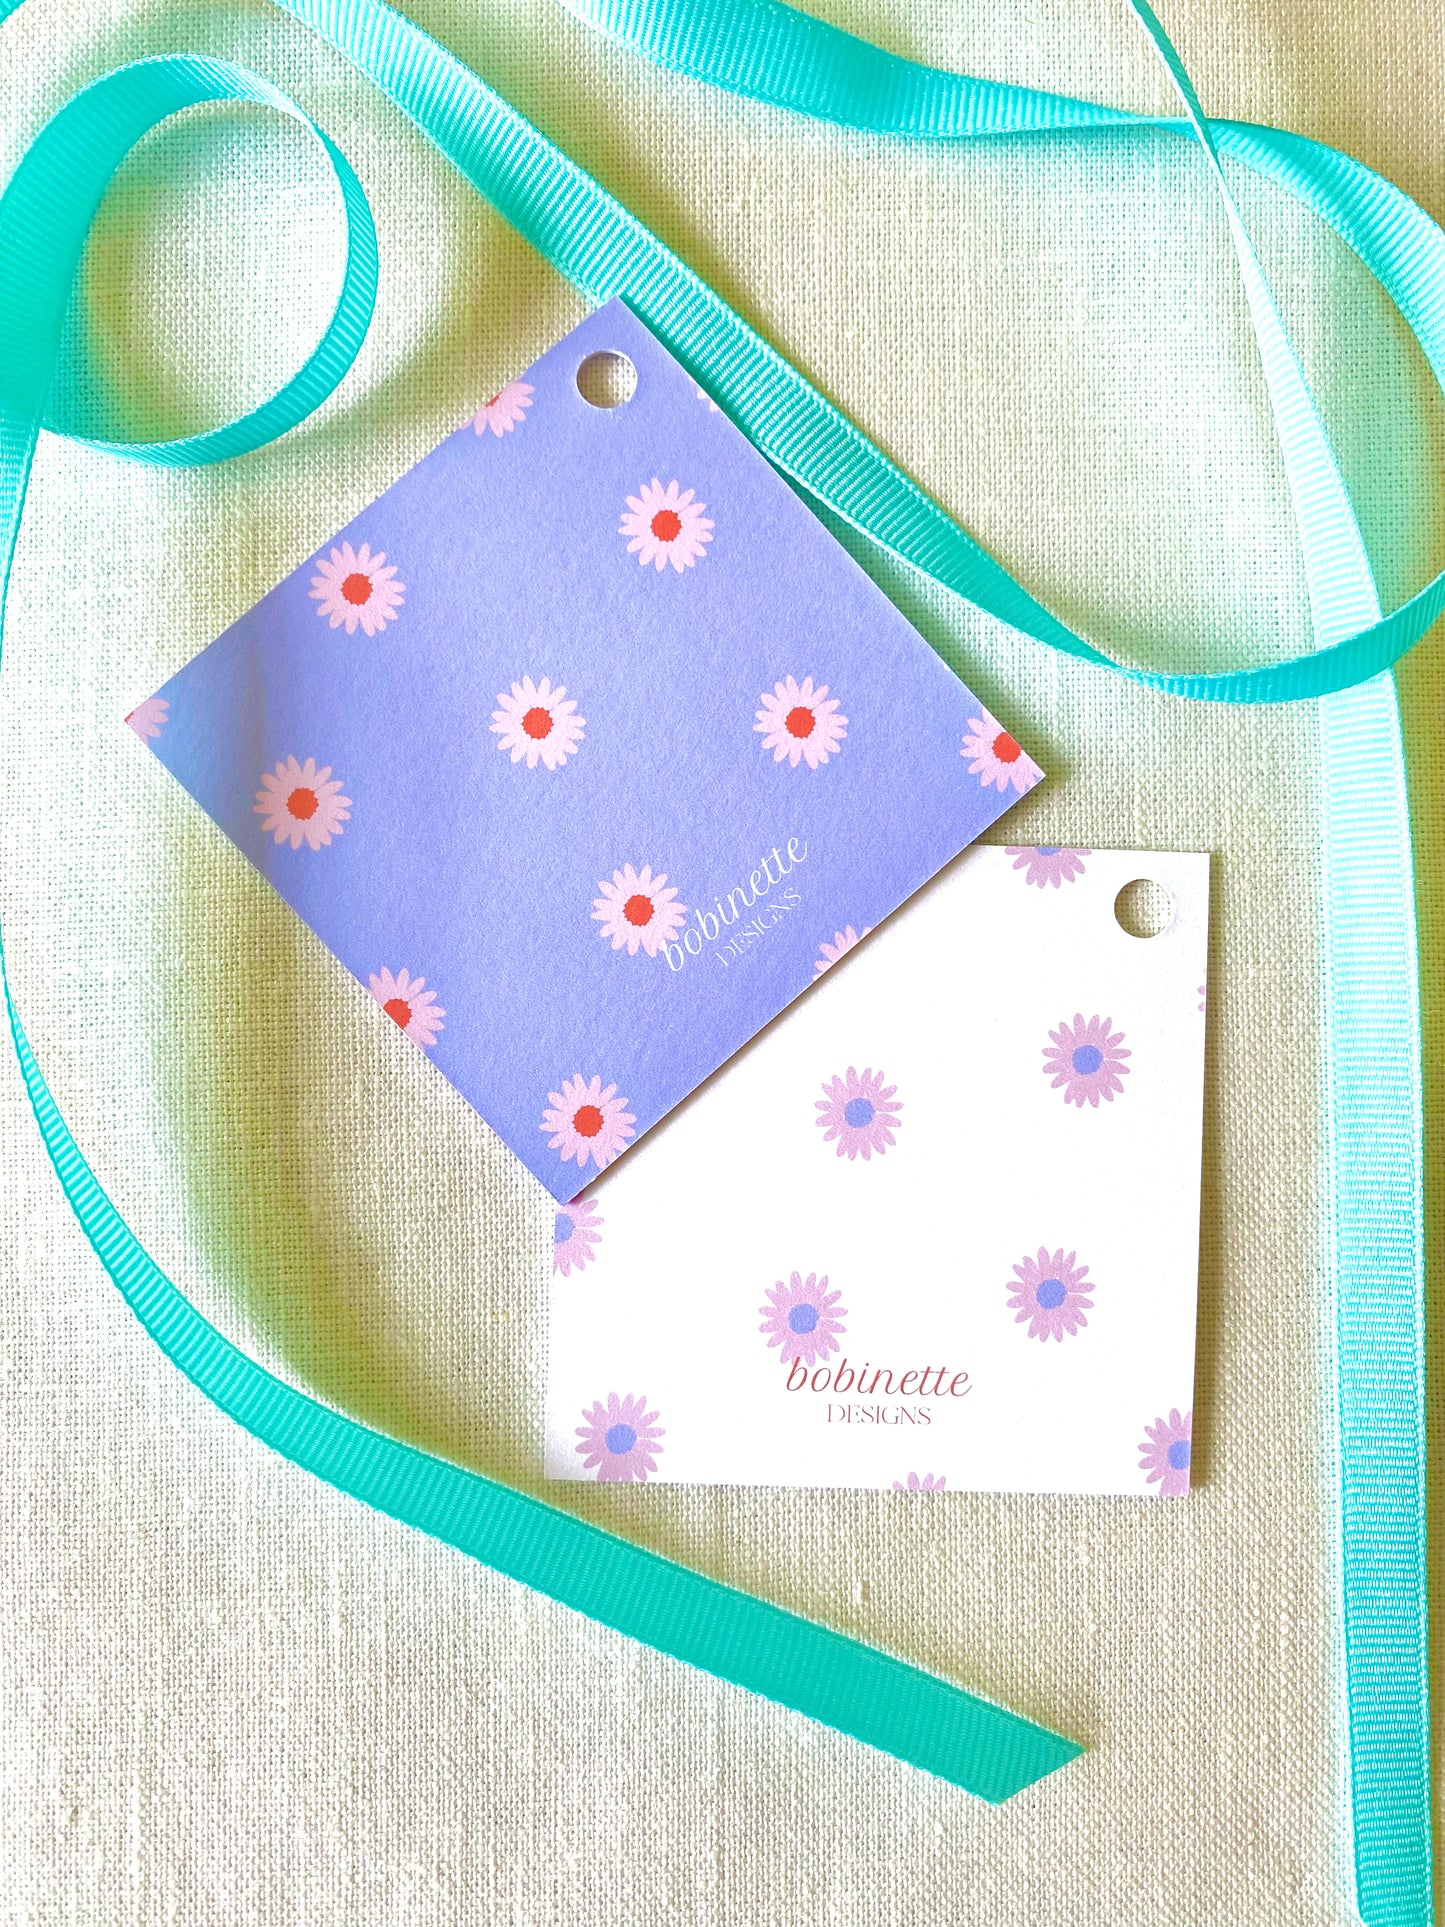 Stationery - Gift Tags - Hooray Girlies